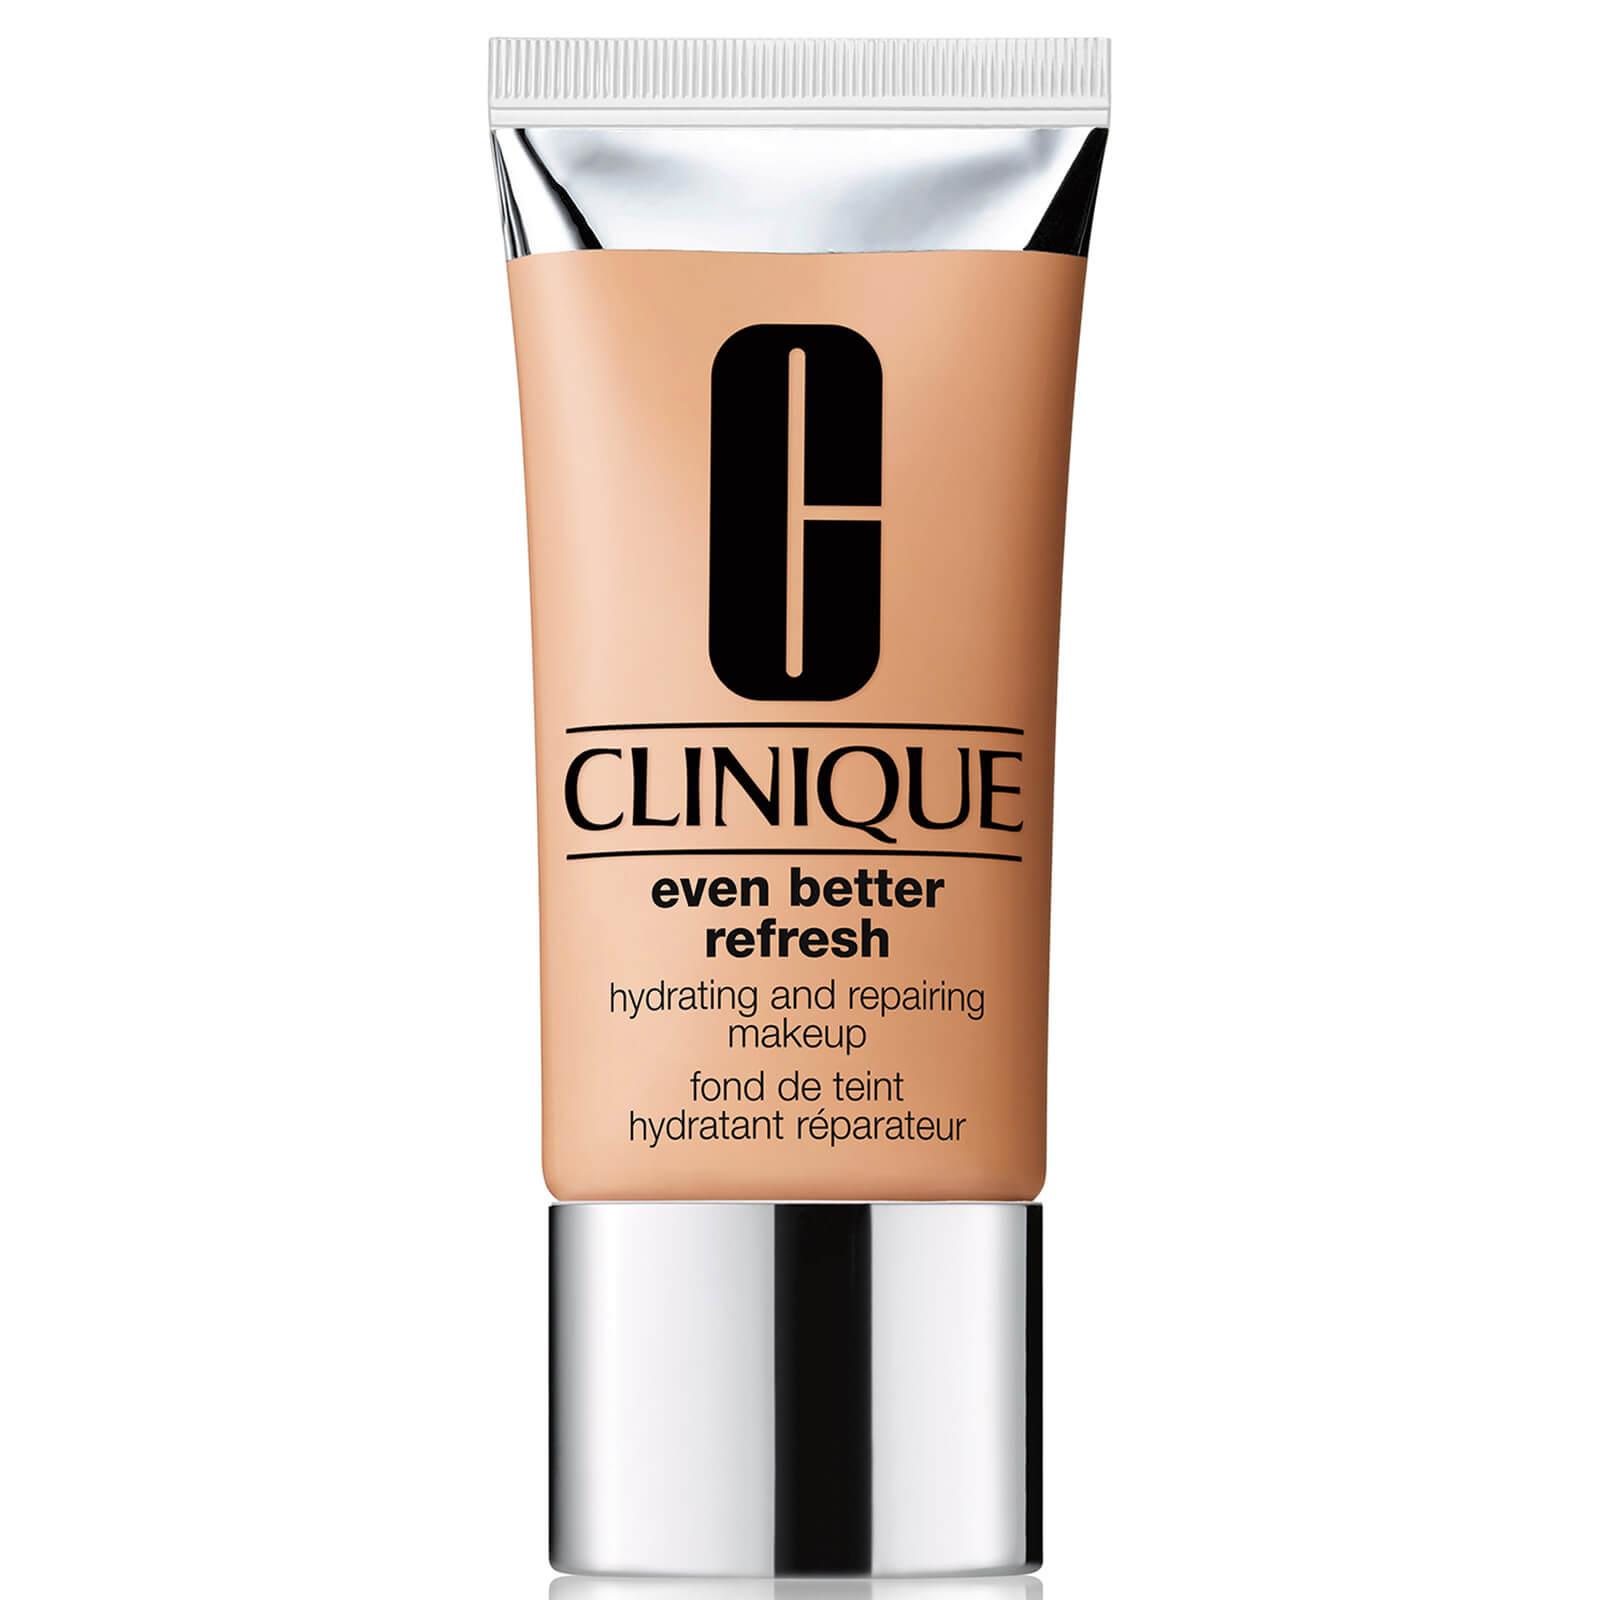 Clinique Even Better Refresh Hydrating and Repairing Makeup 30ml (Various Shades) - WN 76 Toasted Wheat